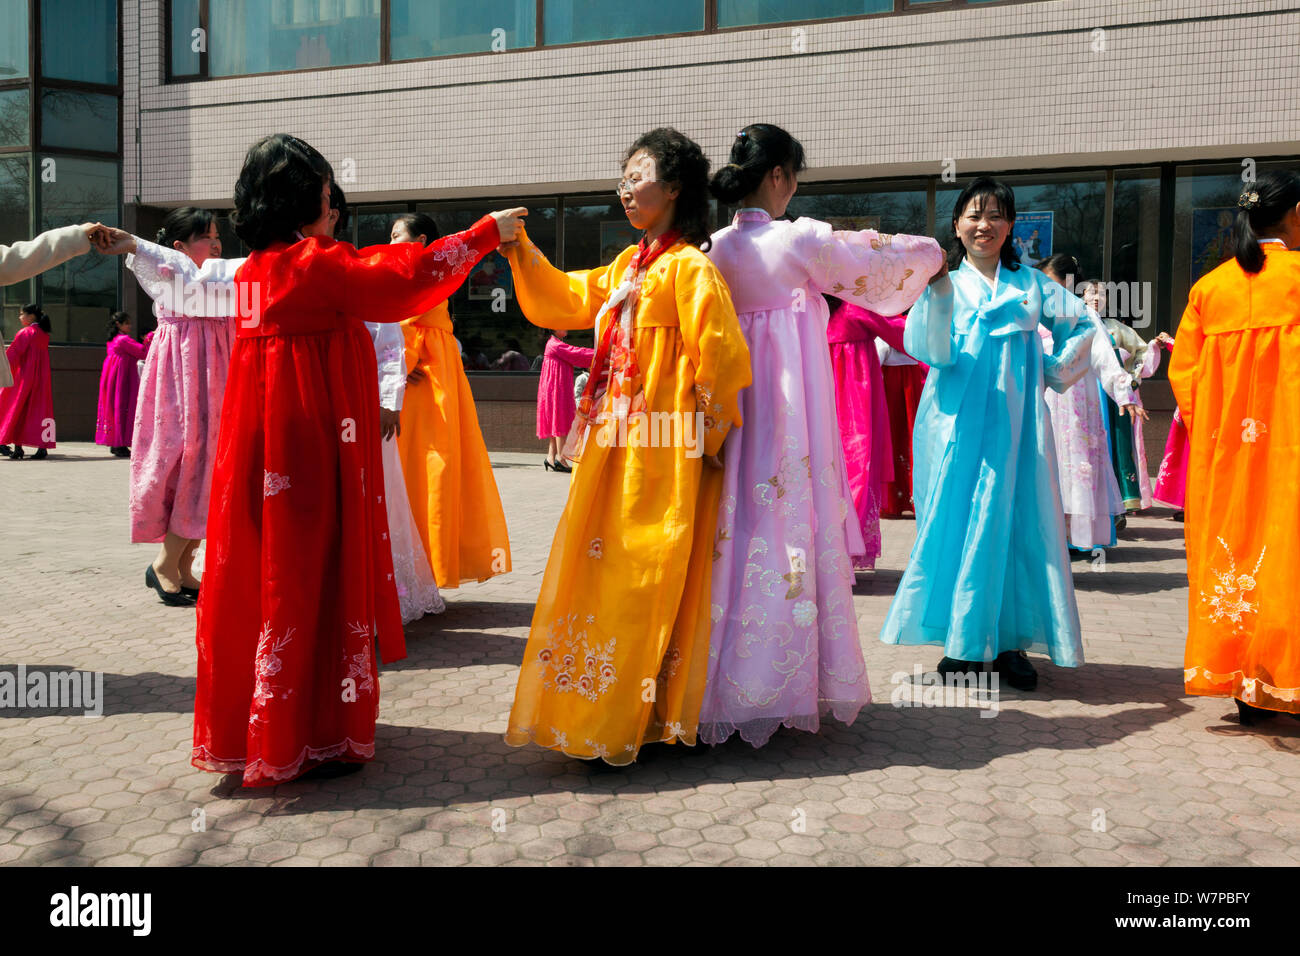 Women in traditional dress dancing during street celebrations on the 100th anniversary of the birth of President Kim IL Sung, Pyongyang, Democratic Peoples' Republic of Korea (DPRK), North Korea, April 15 2012 Stock Photo